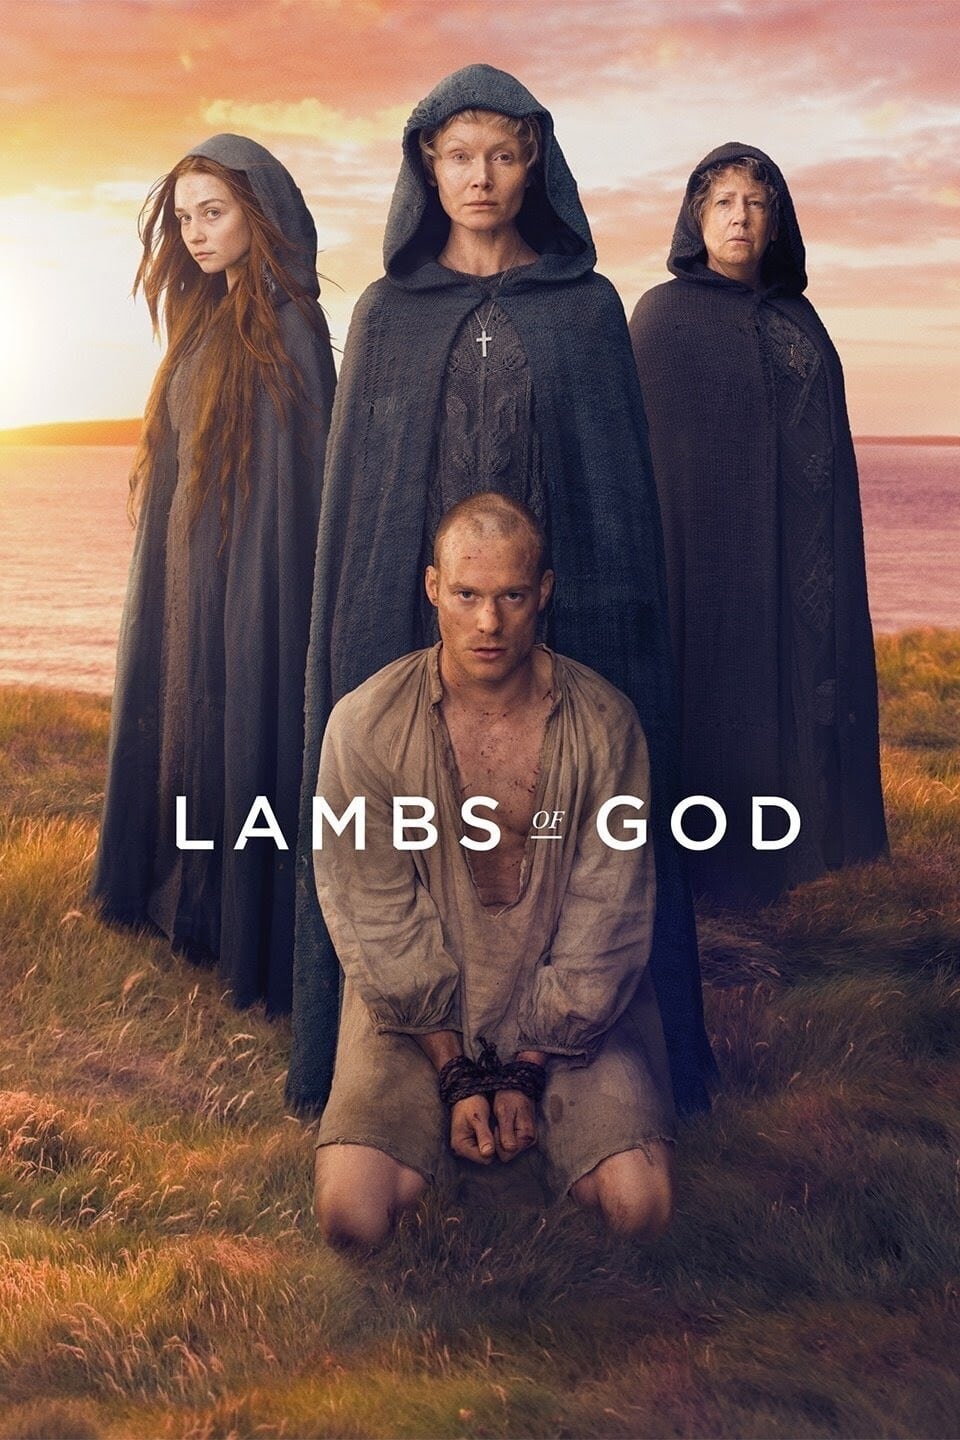 Lambs of God TV Shows About Catholic Church